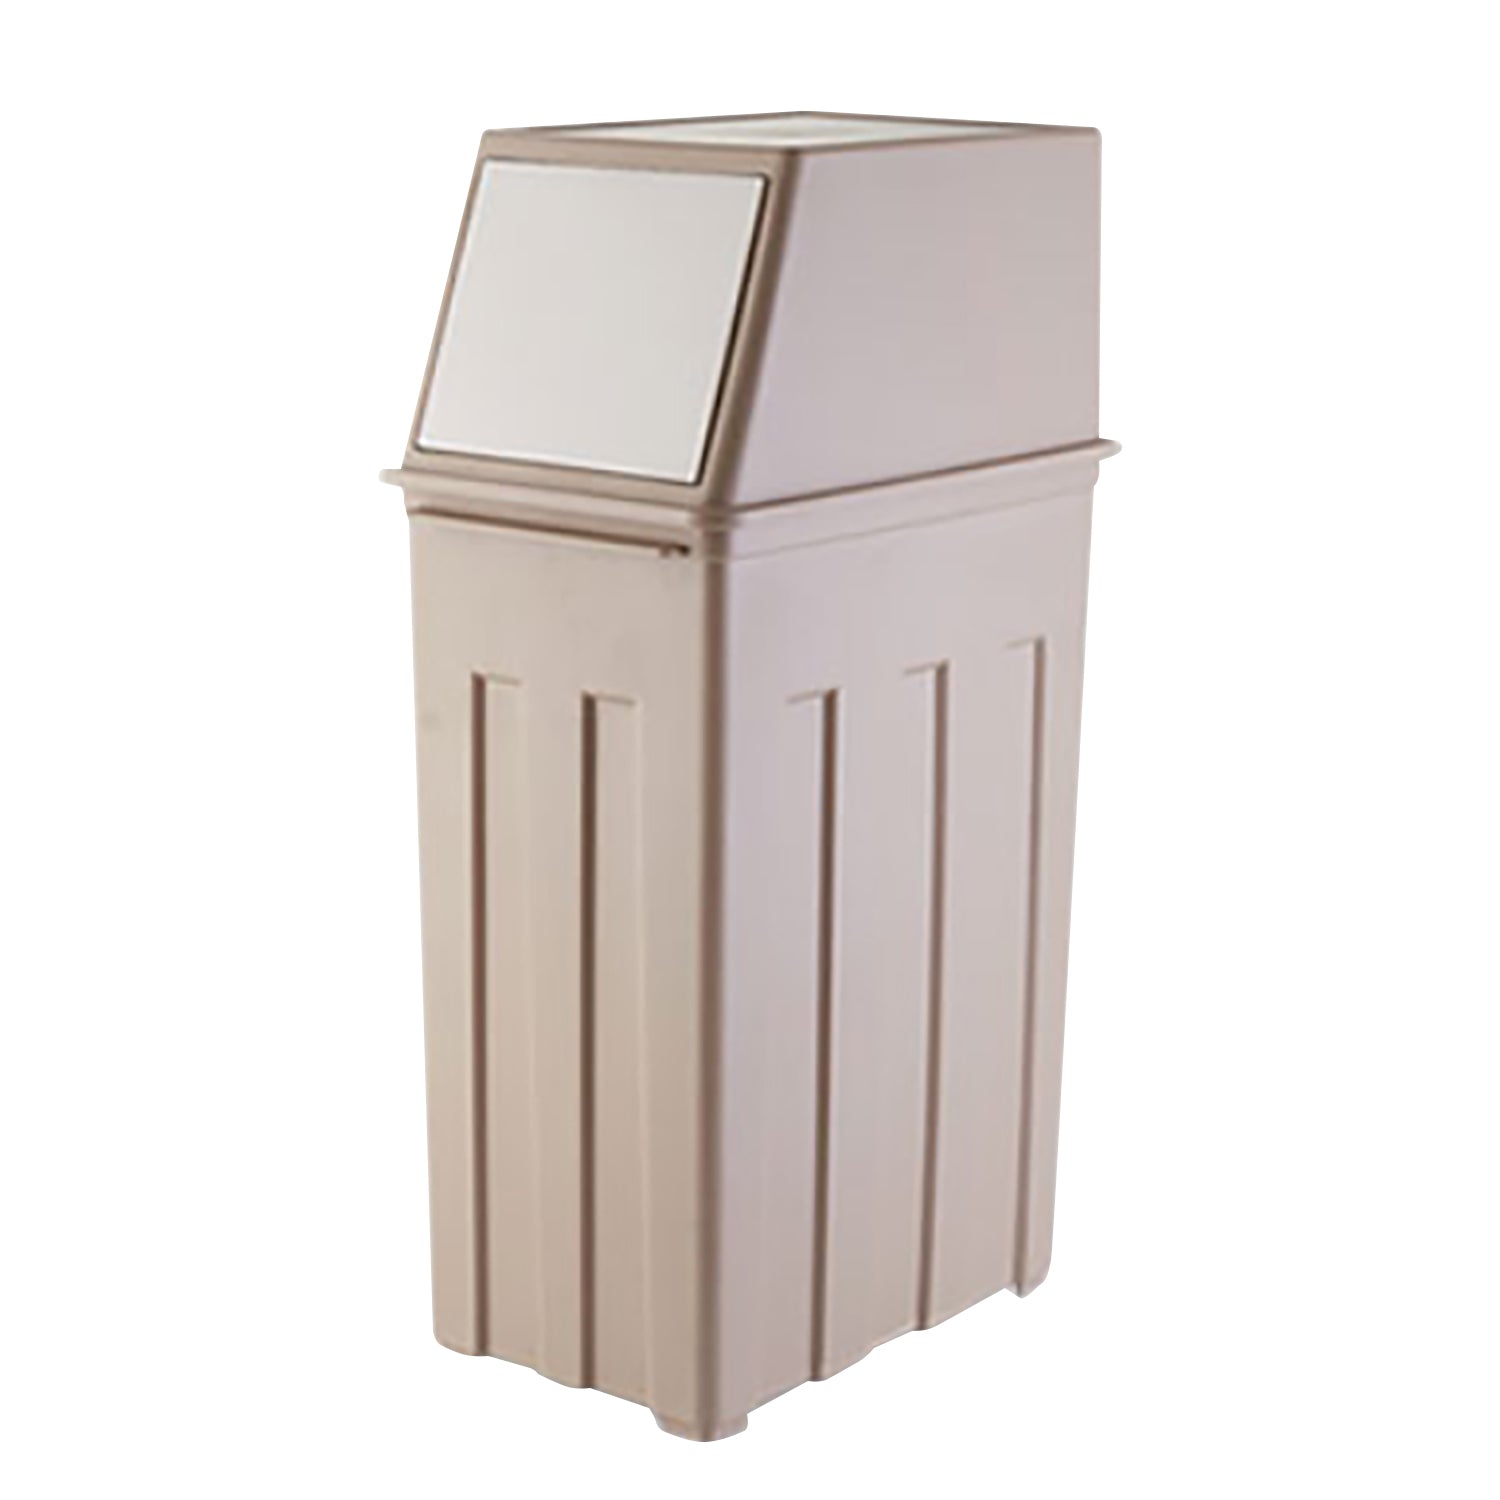 Load image into Gallery viewer, 8 Gallon Trash Can with Hinged Flap Cover | Indoor Outdoor Swing Door Waste Basket